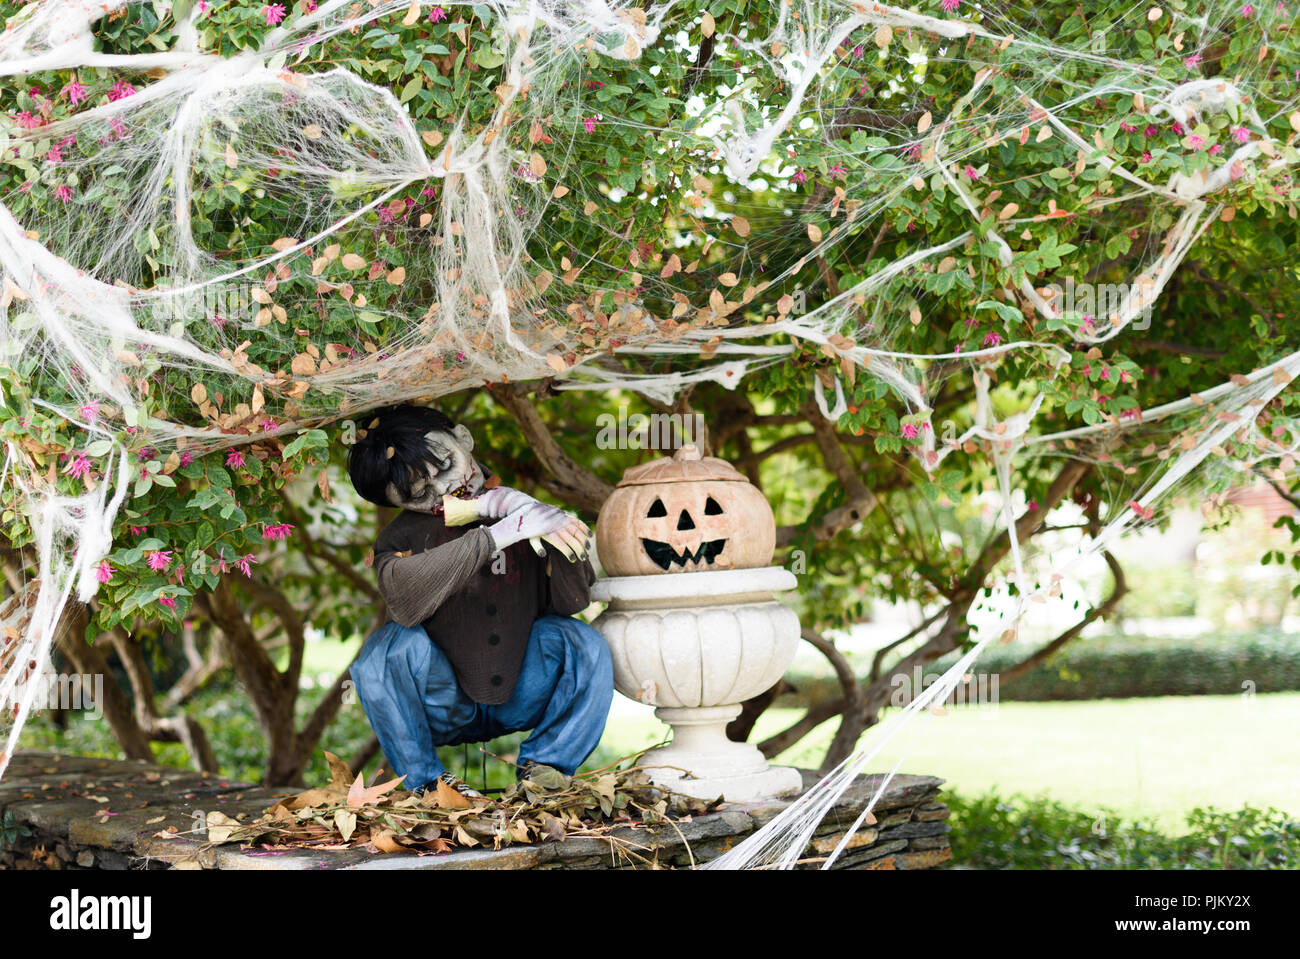 Halloween in front of house decorations Stock Photo